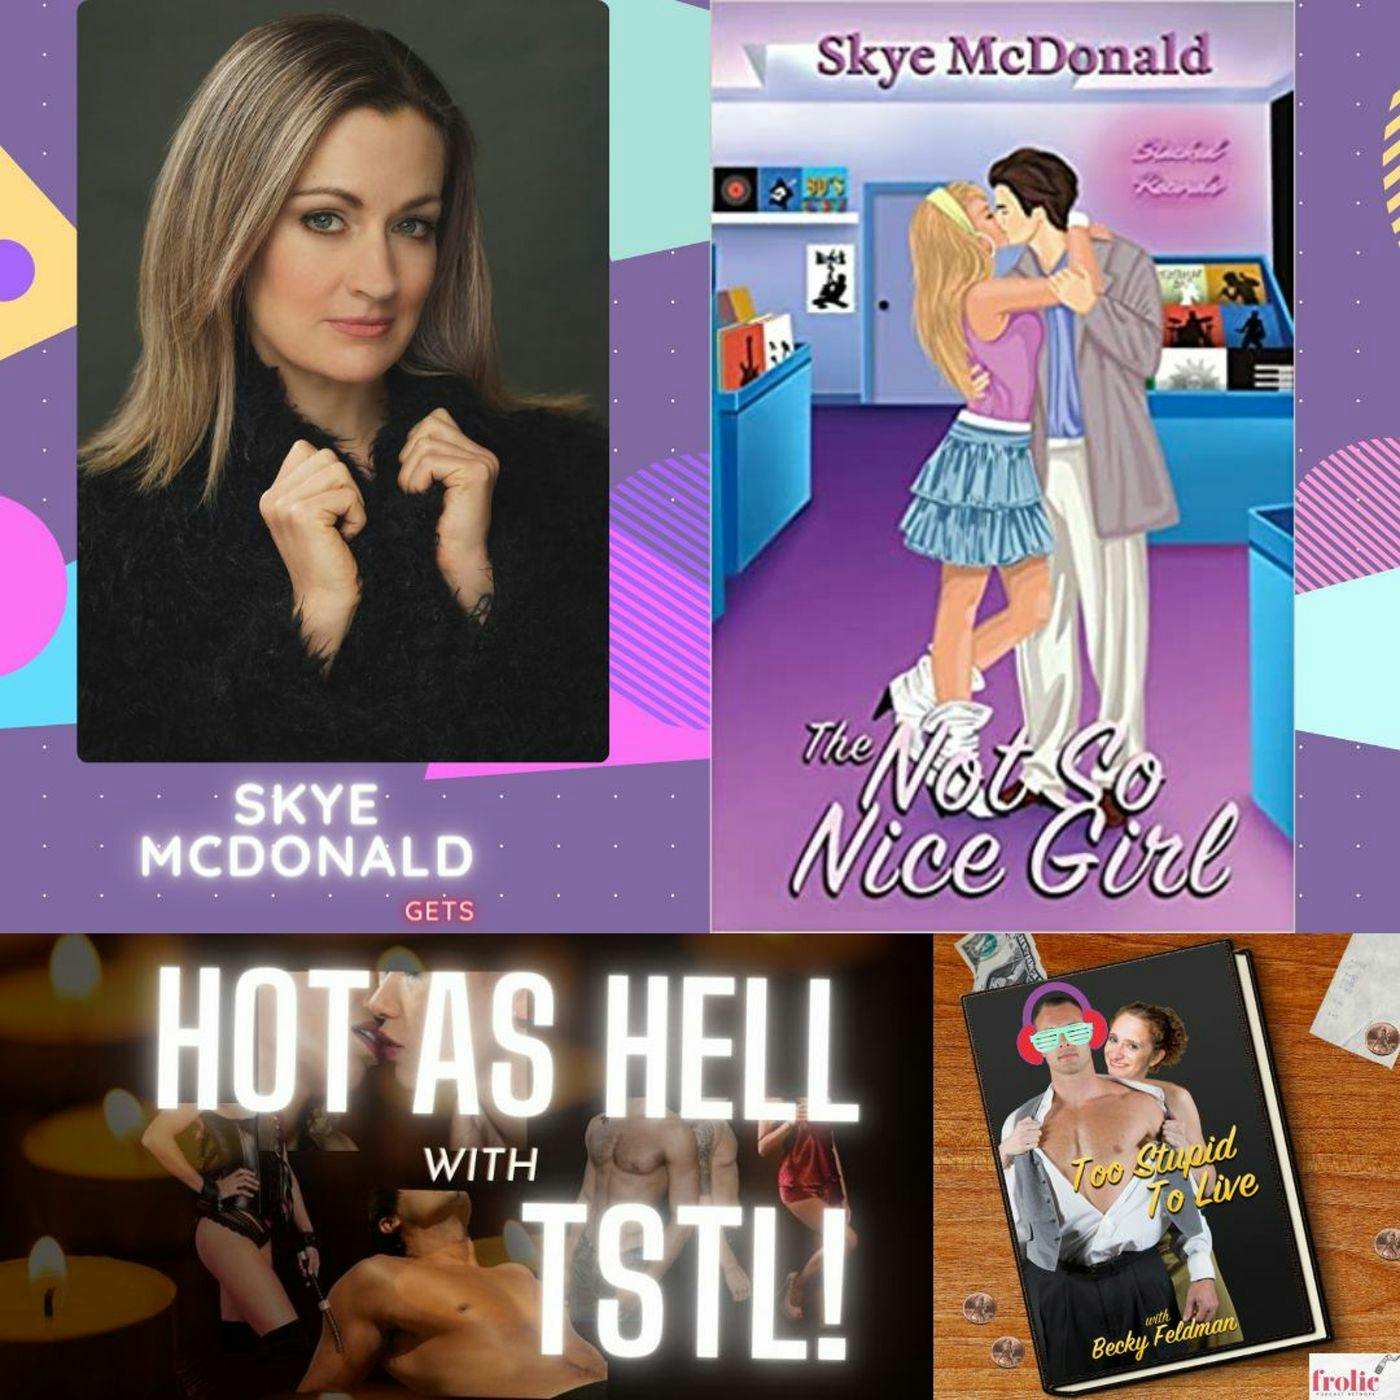 Skye McDonald Gets HOT AS HELL with TSTL!